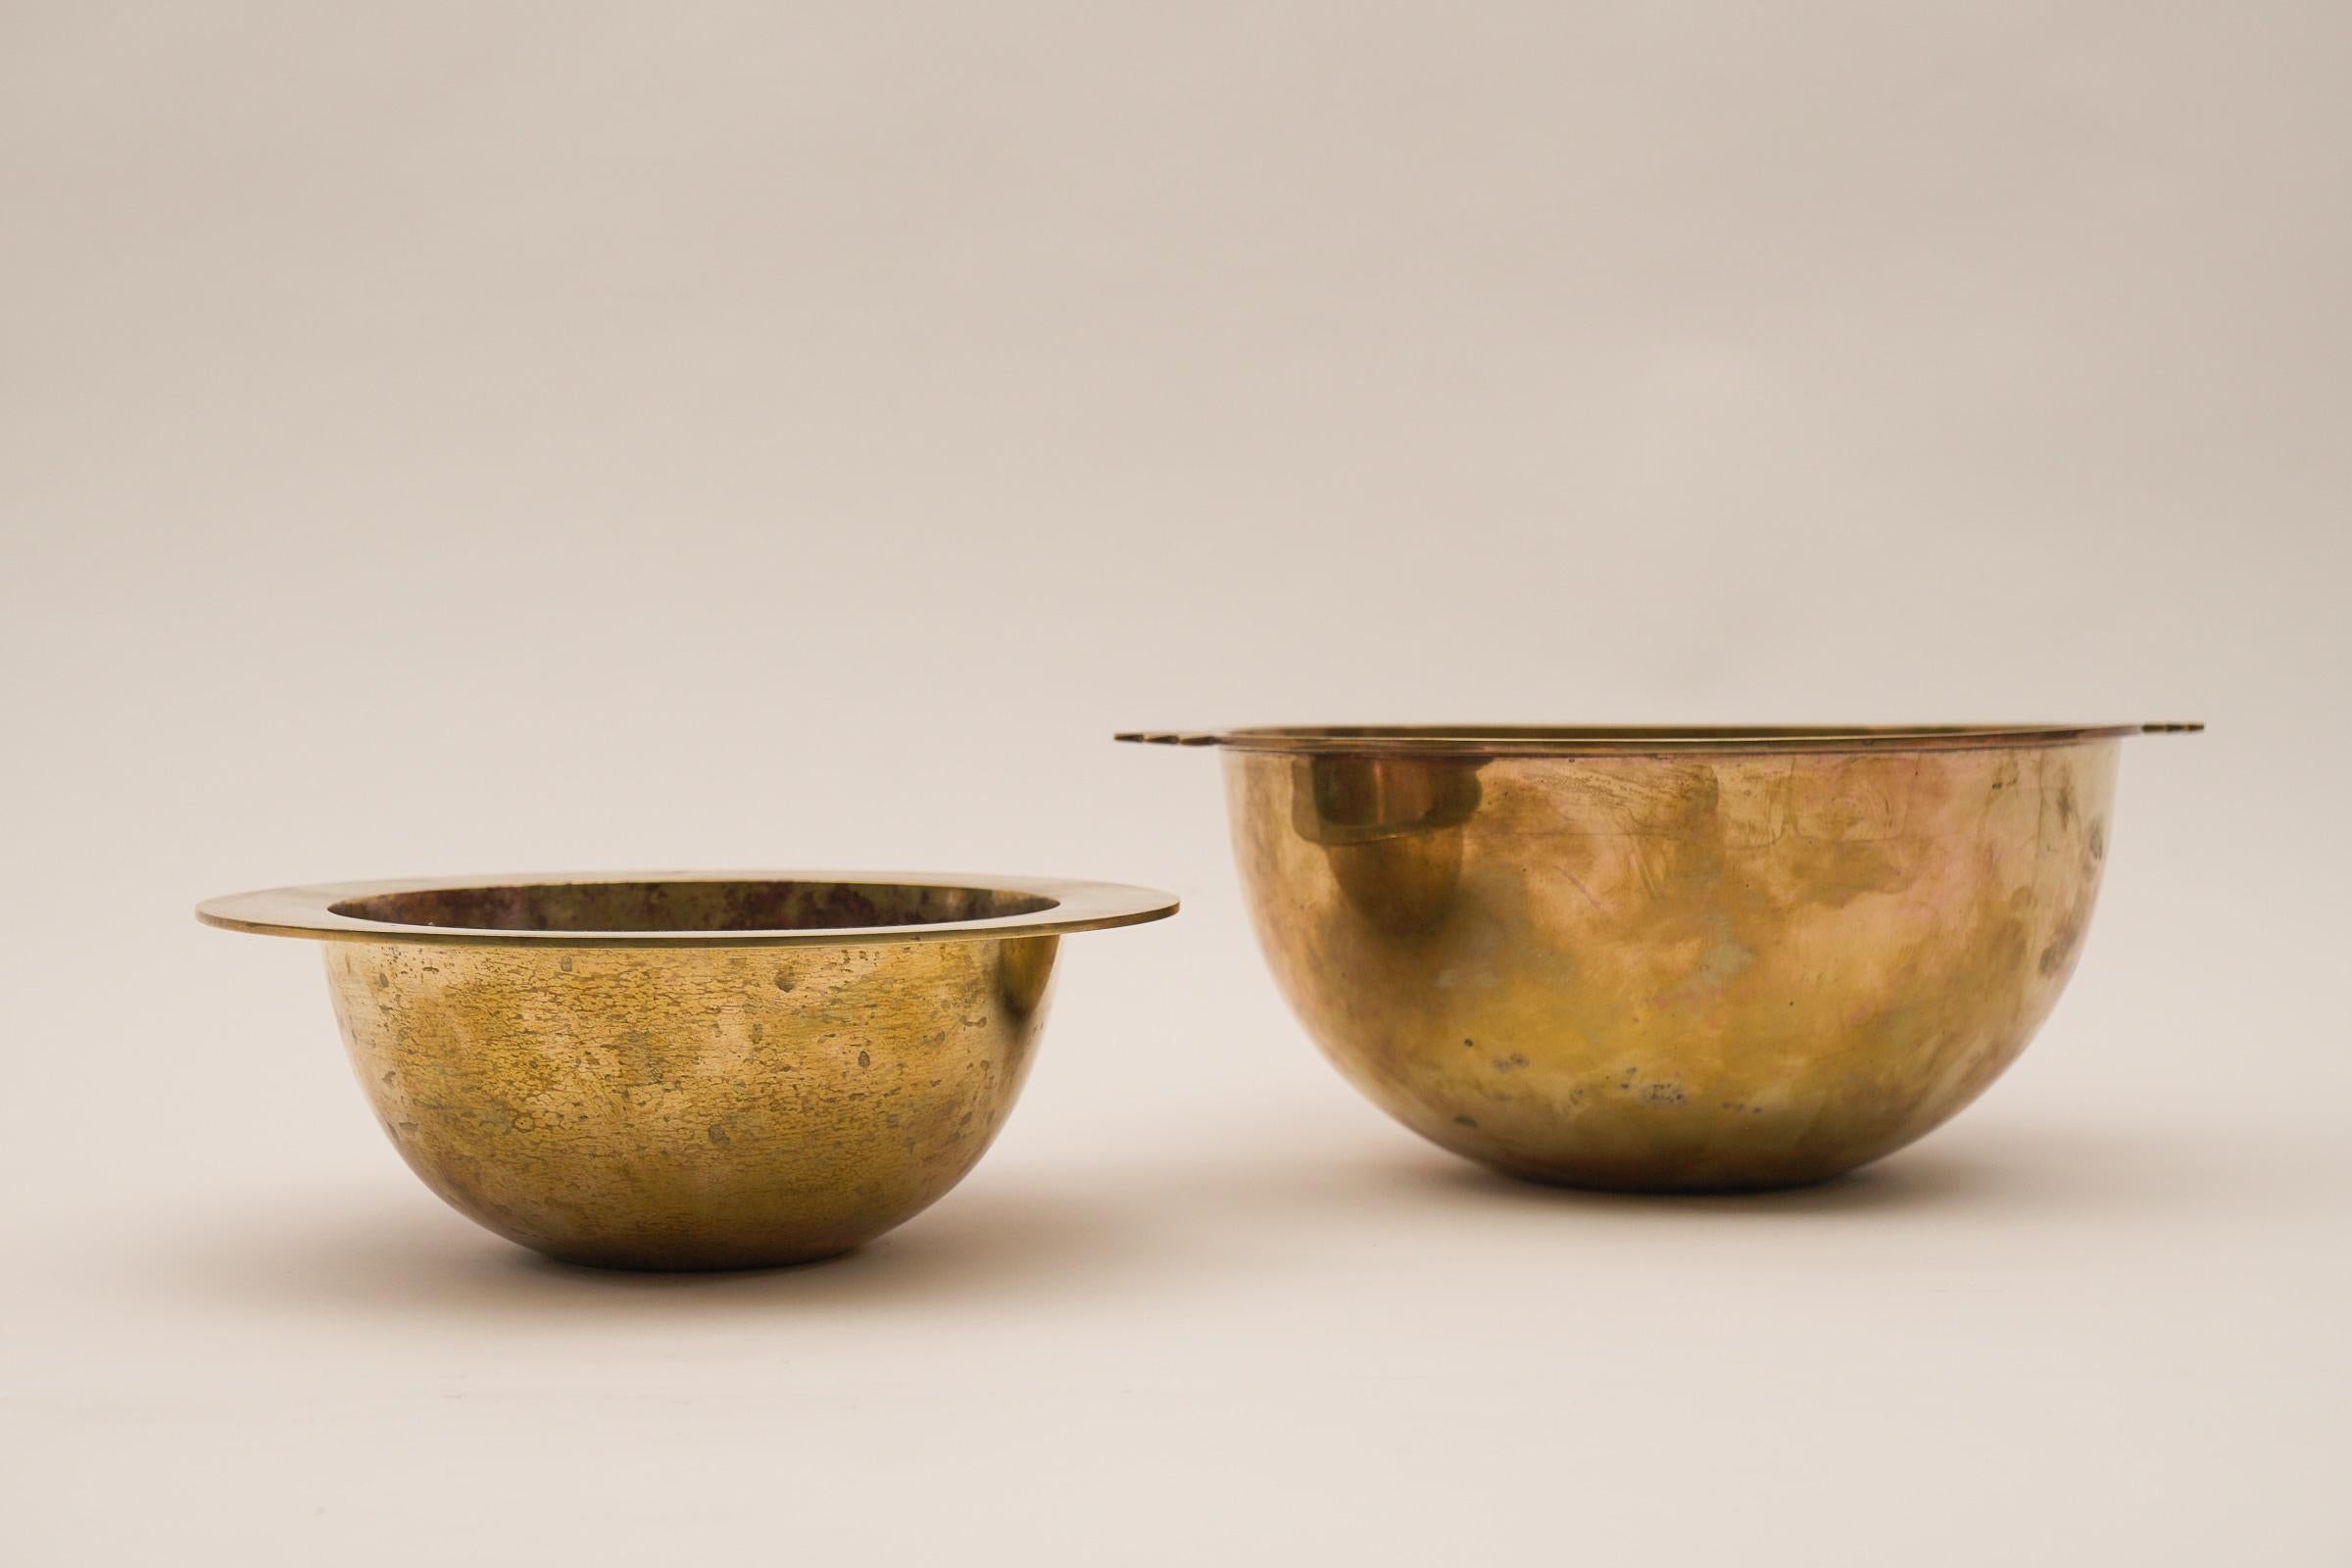 Solid brass bowls from the 1950s.

Wonderfully shaped with two Art Deco handles.

Very decorative with a beautiful patina.